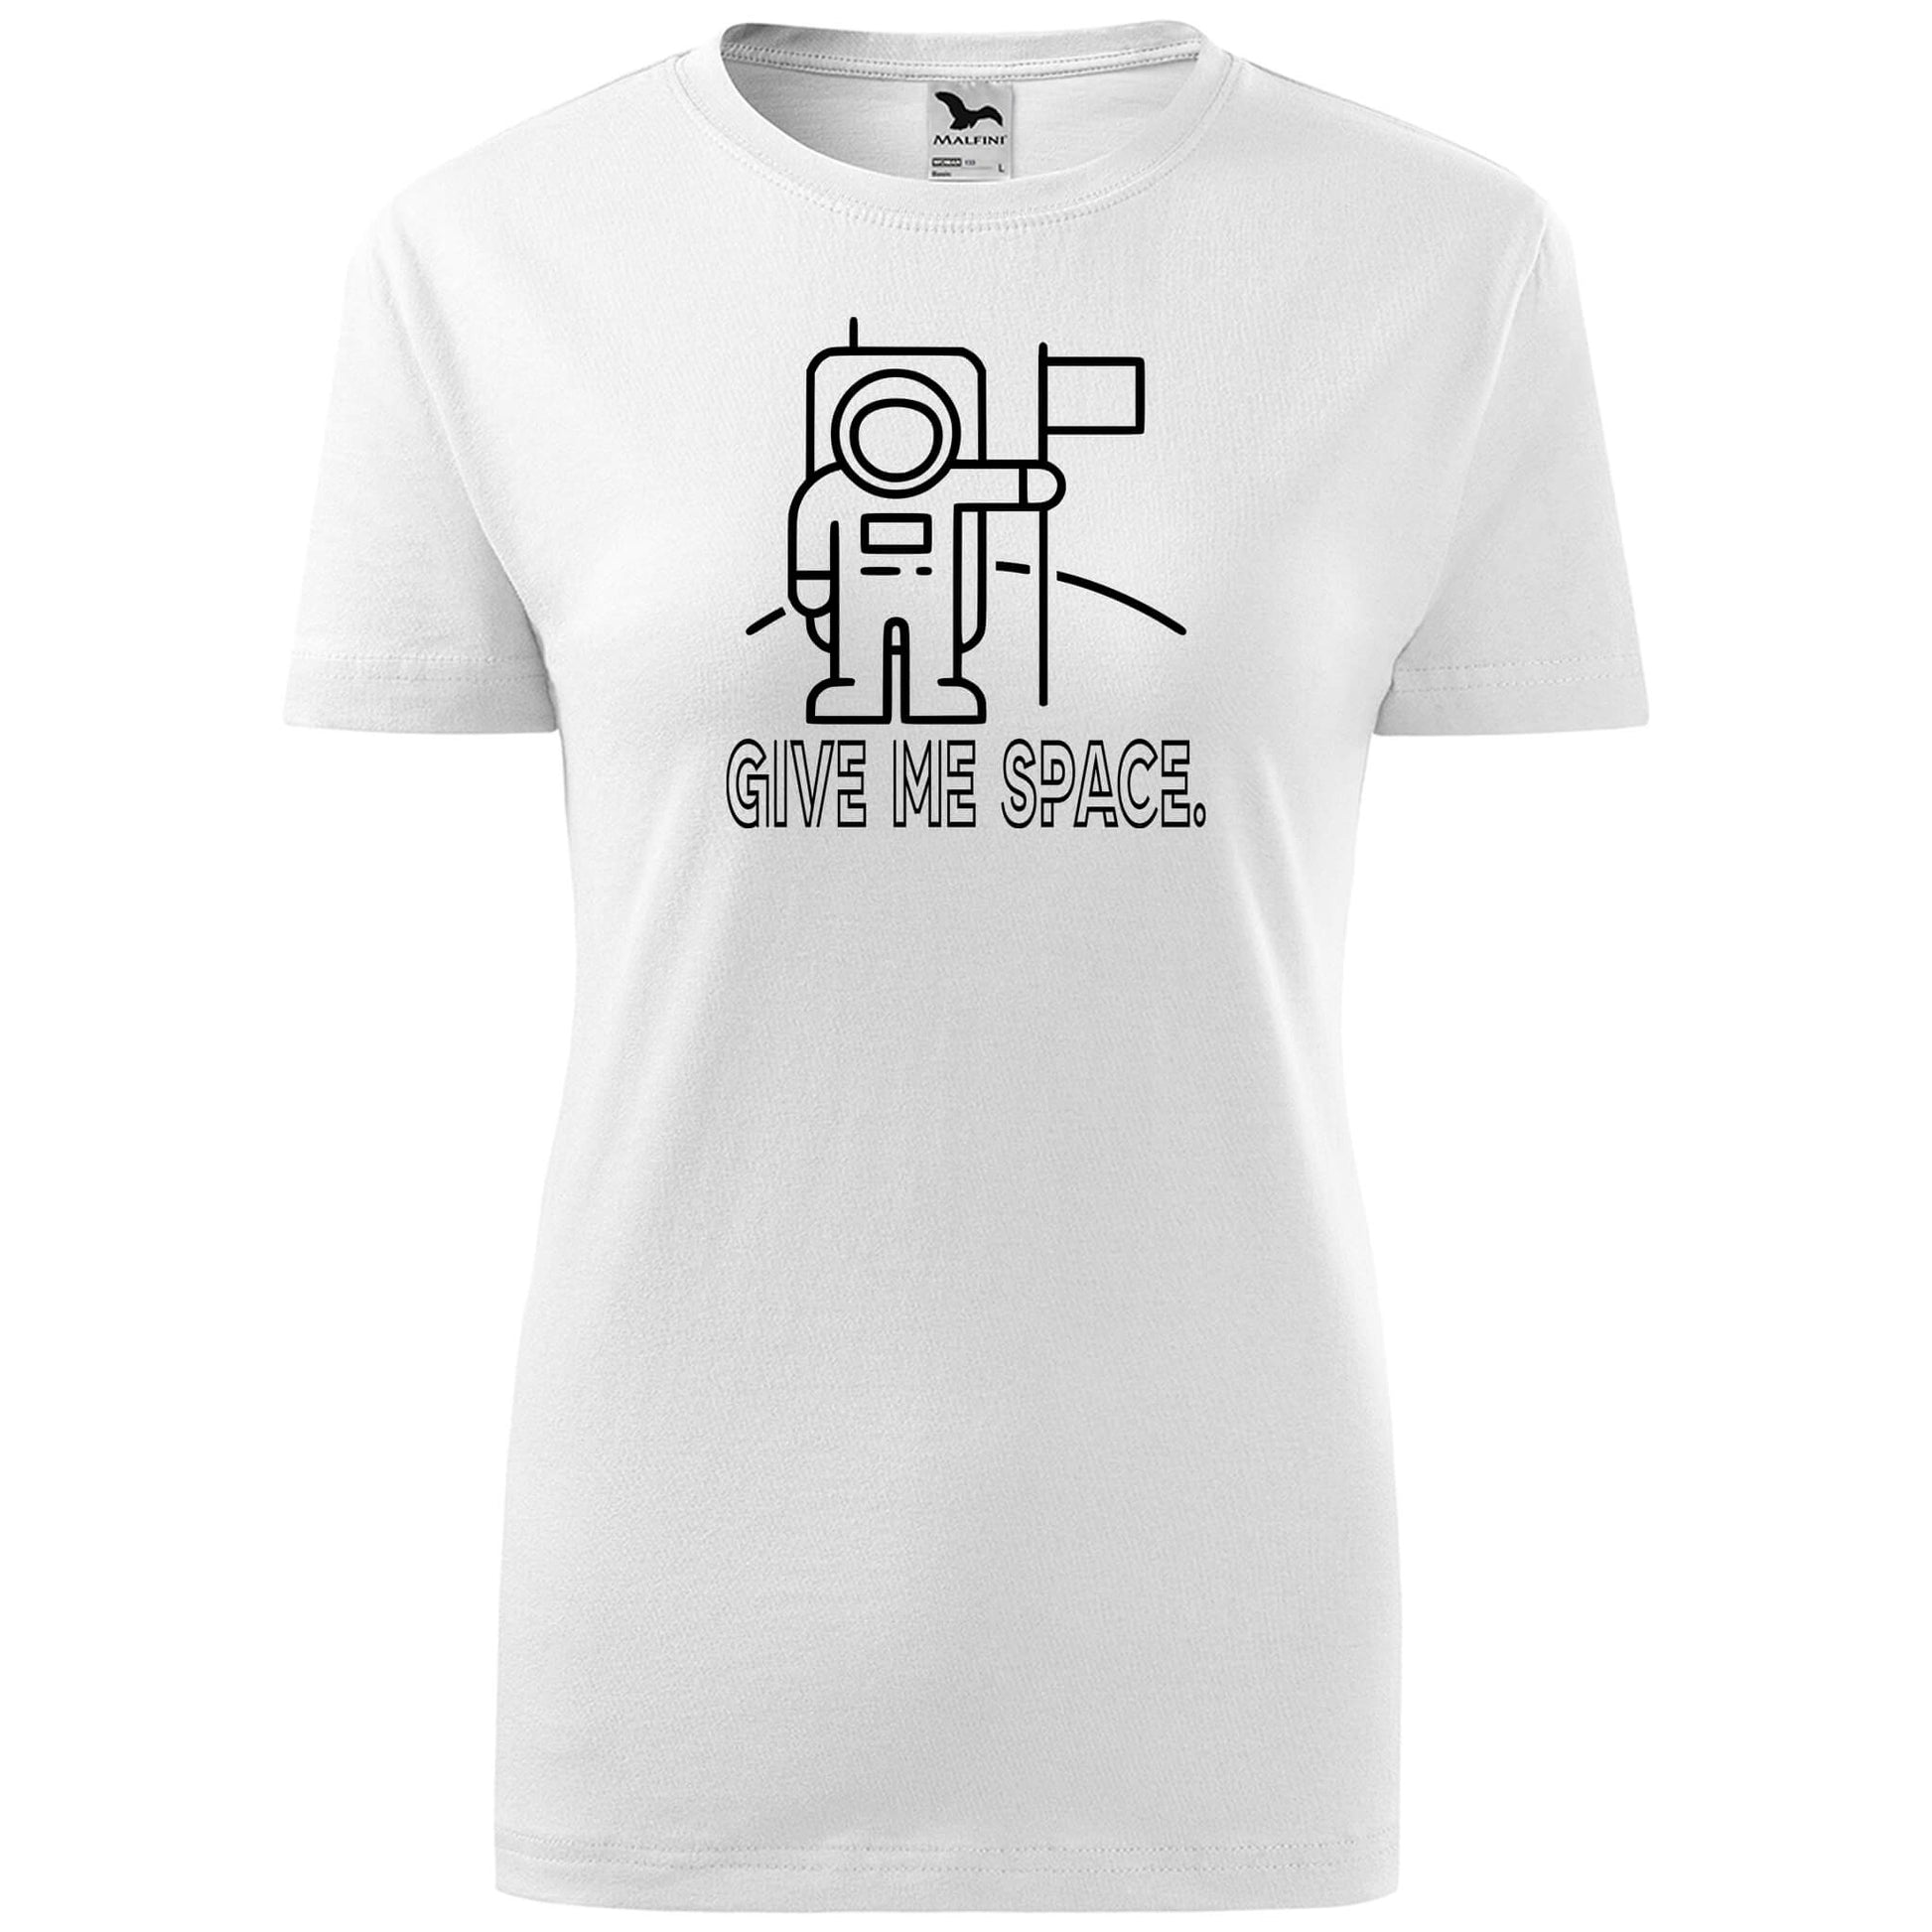 T-shirt - Give me space - rvdesignprint